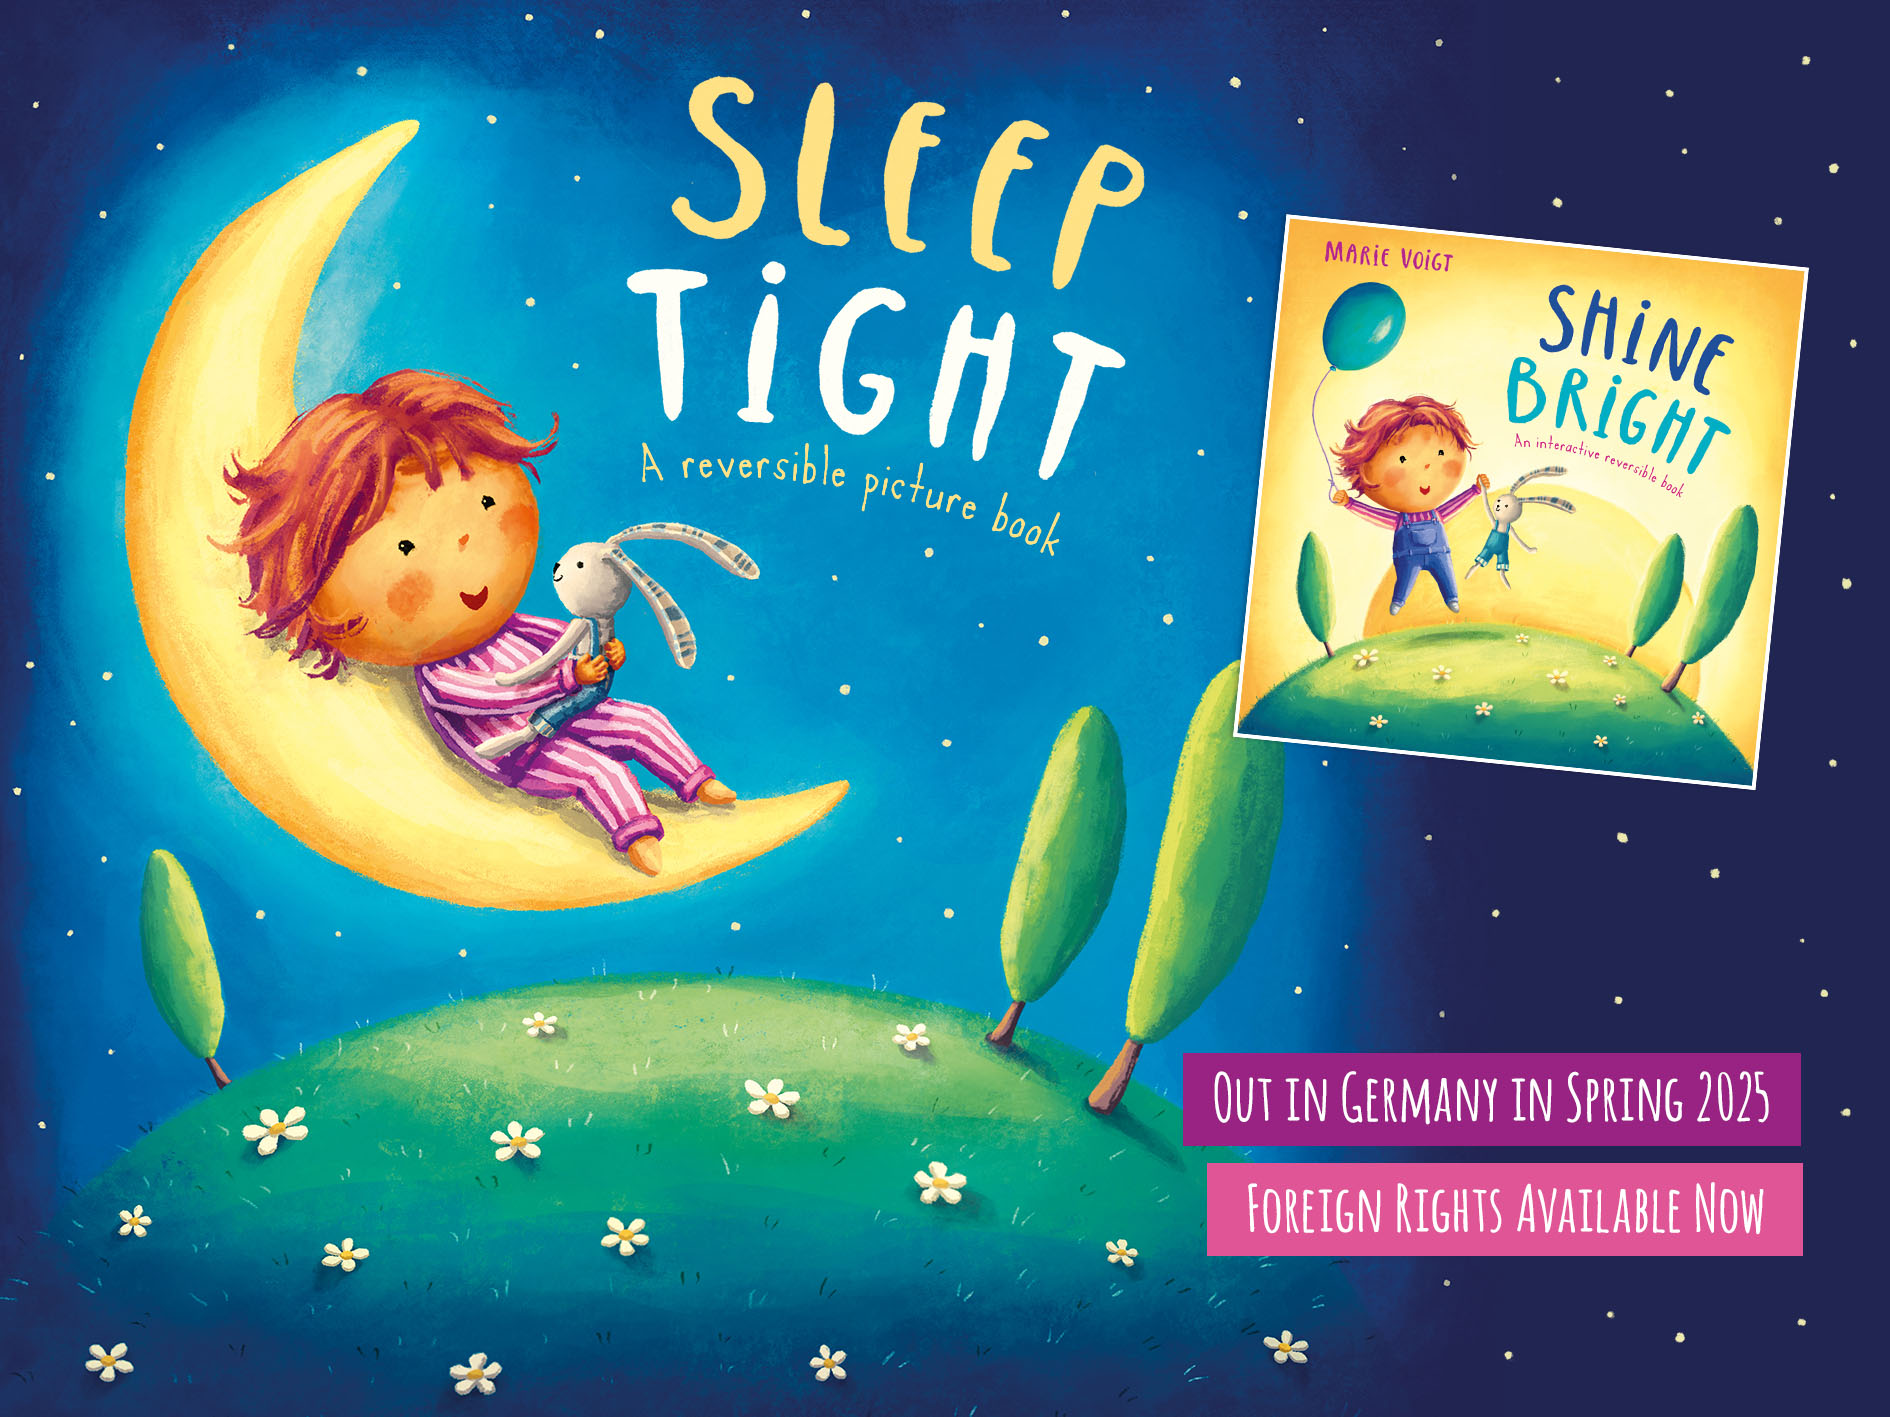 Sleep Tight Shine Bright - The new reversible picture book by Marie Voigt